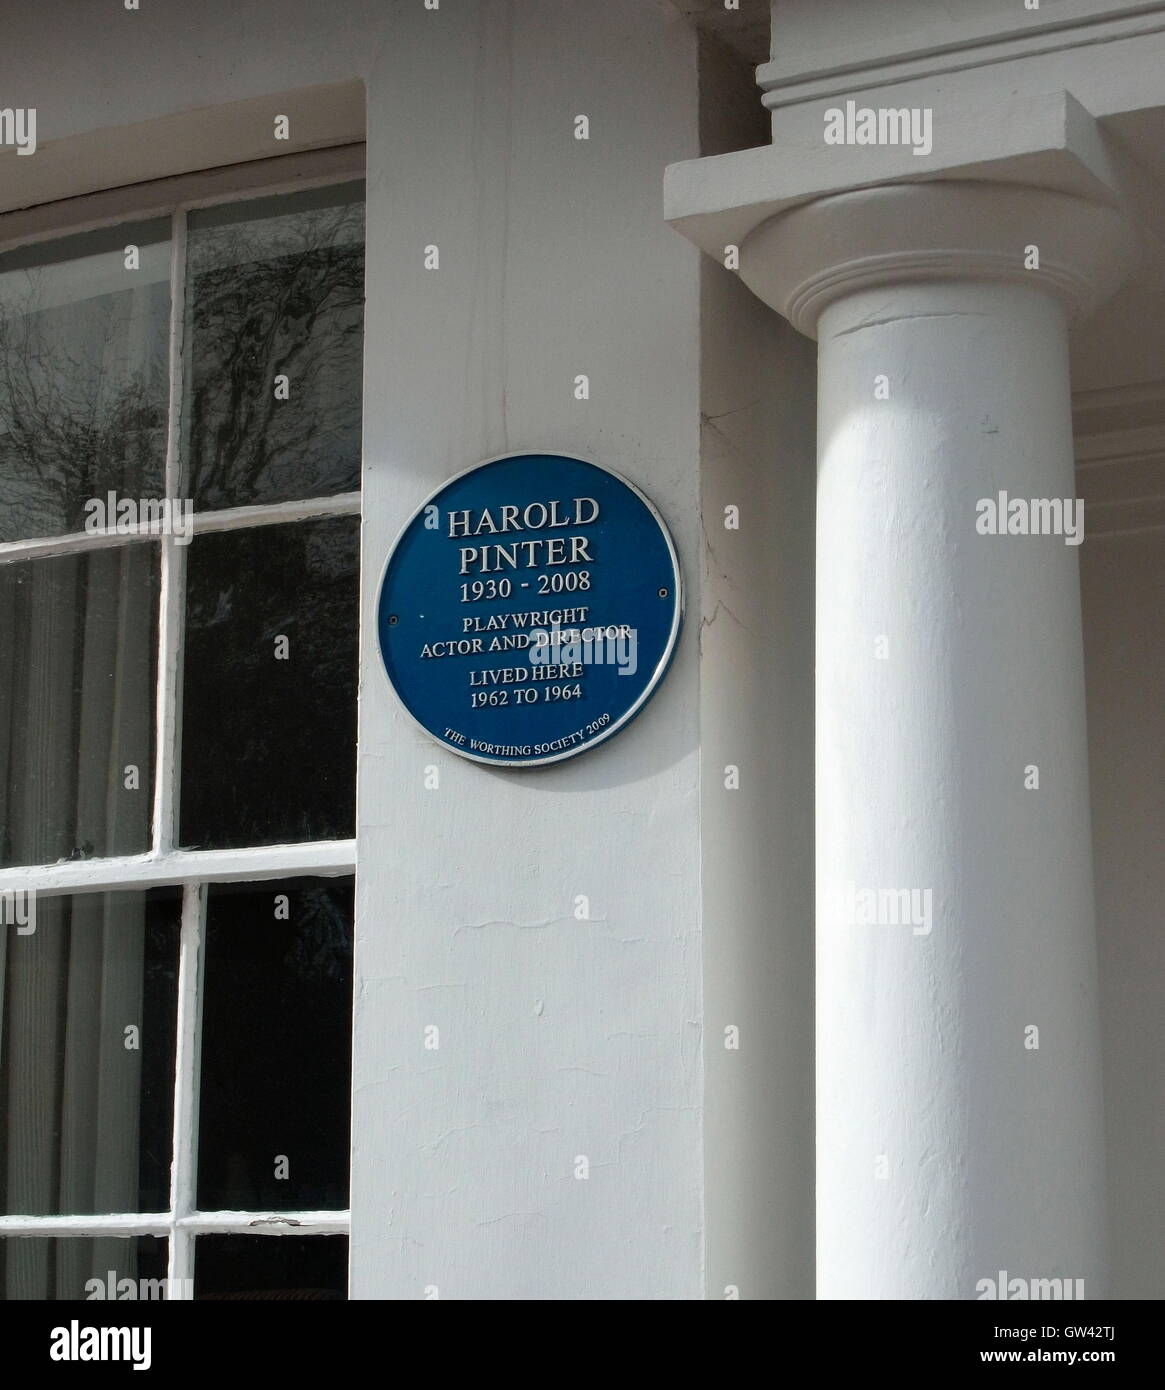 AJAXNETPHOTO. 2016. WORTHING, ENGLAND. - PLAYWRIGHT'S HOME - BLUE PLAQUE COMMEMORATING PROPERTY IN THE TOWN NEAR THE CONNAUGHT THEATRE TAHT WAS HOME OF THE PLAYWRIGHT, ACTOR AND DIRECTOR HAROLD PINTER BETWEEN 1962-1964.  PHOTO:JONATHAN EASTLAND/AJAX  REF:GX161507 944 Stock Photo